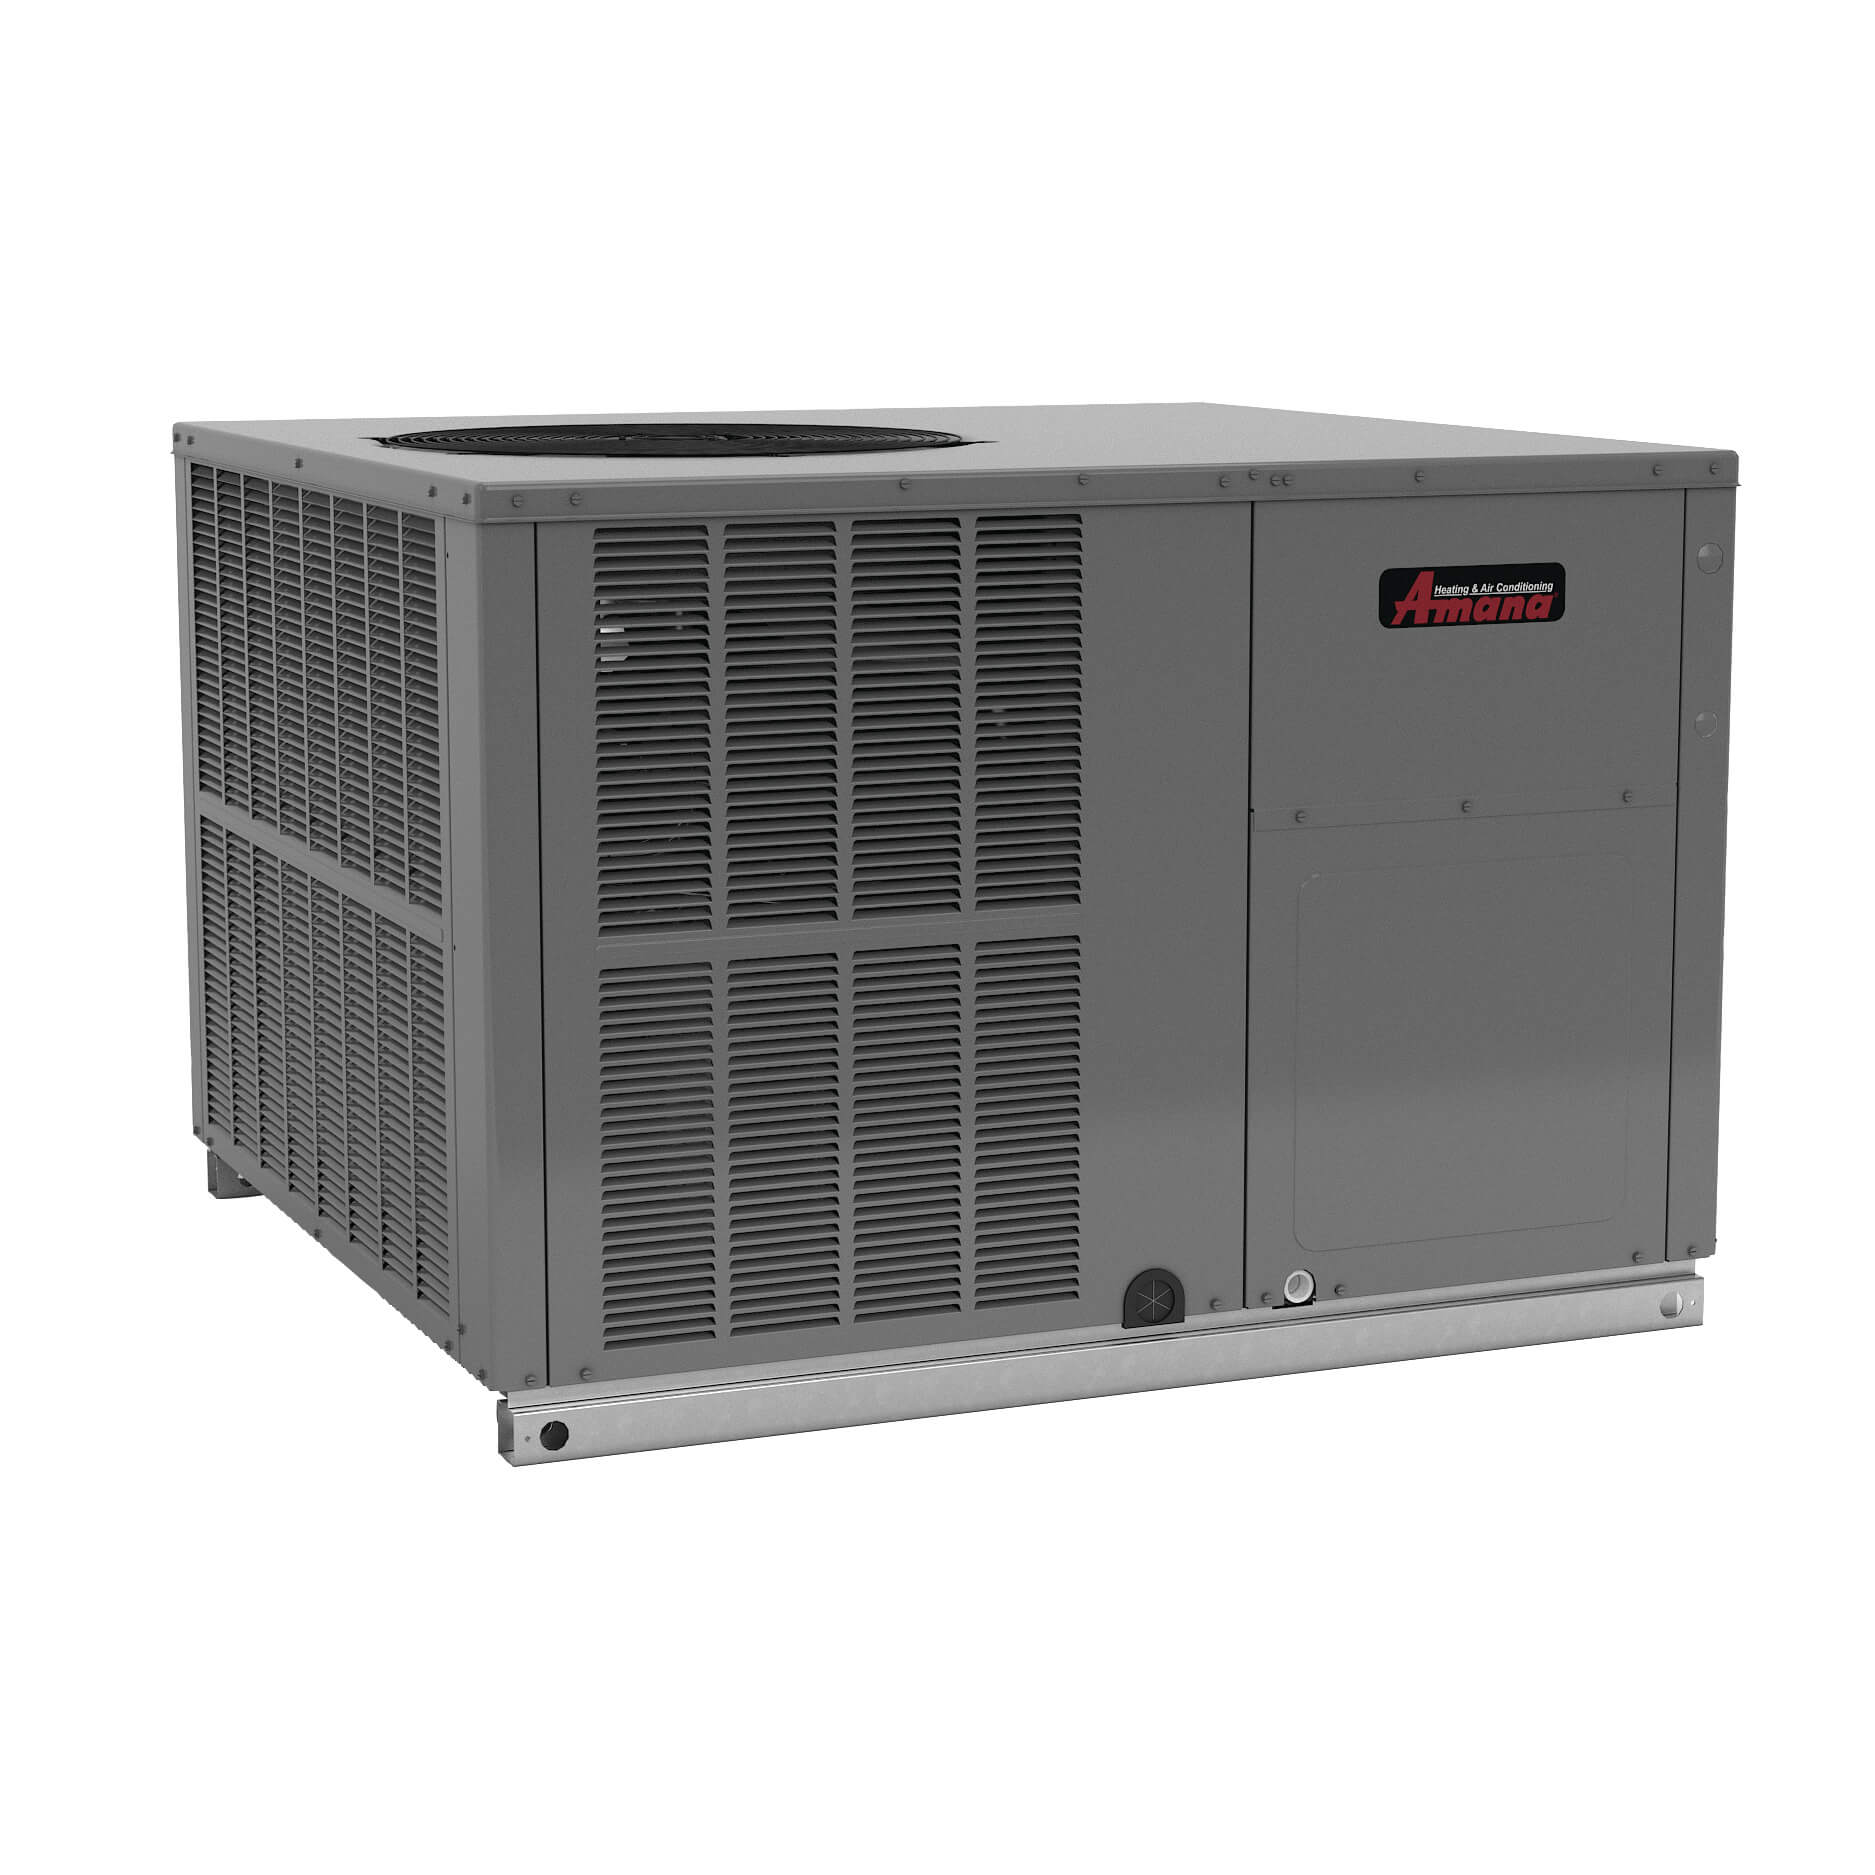 Heat Pump Services in Folsom, Granite Bay, Loomis, CA and Surrounding Areas